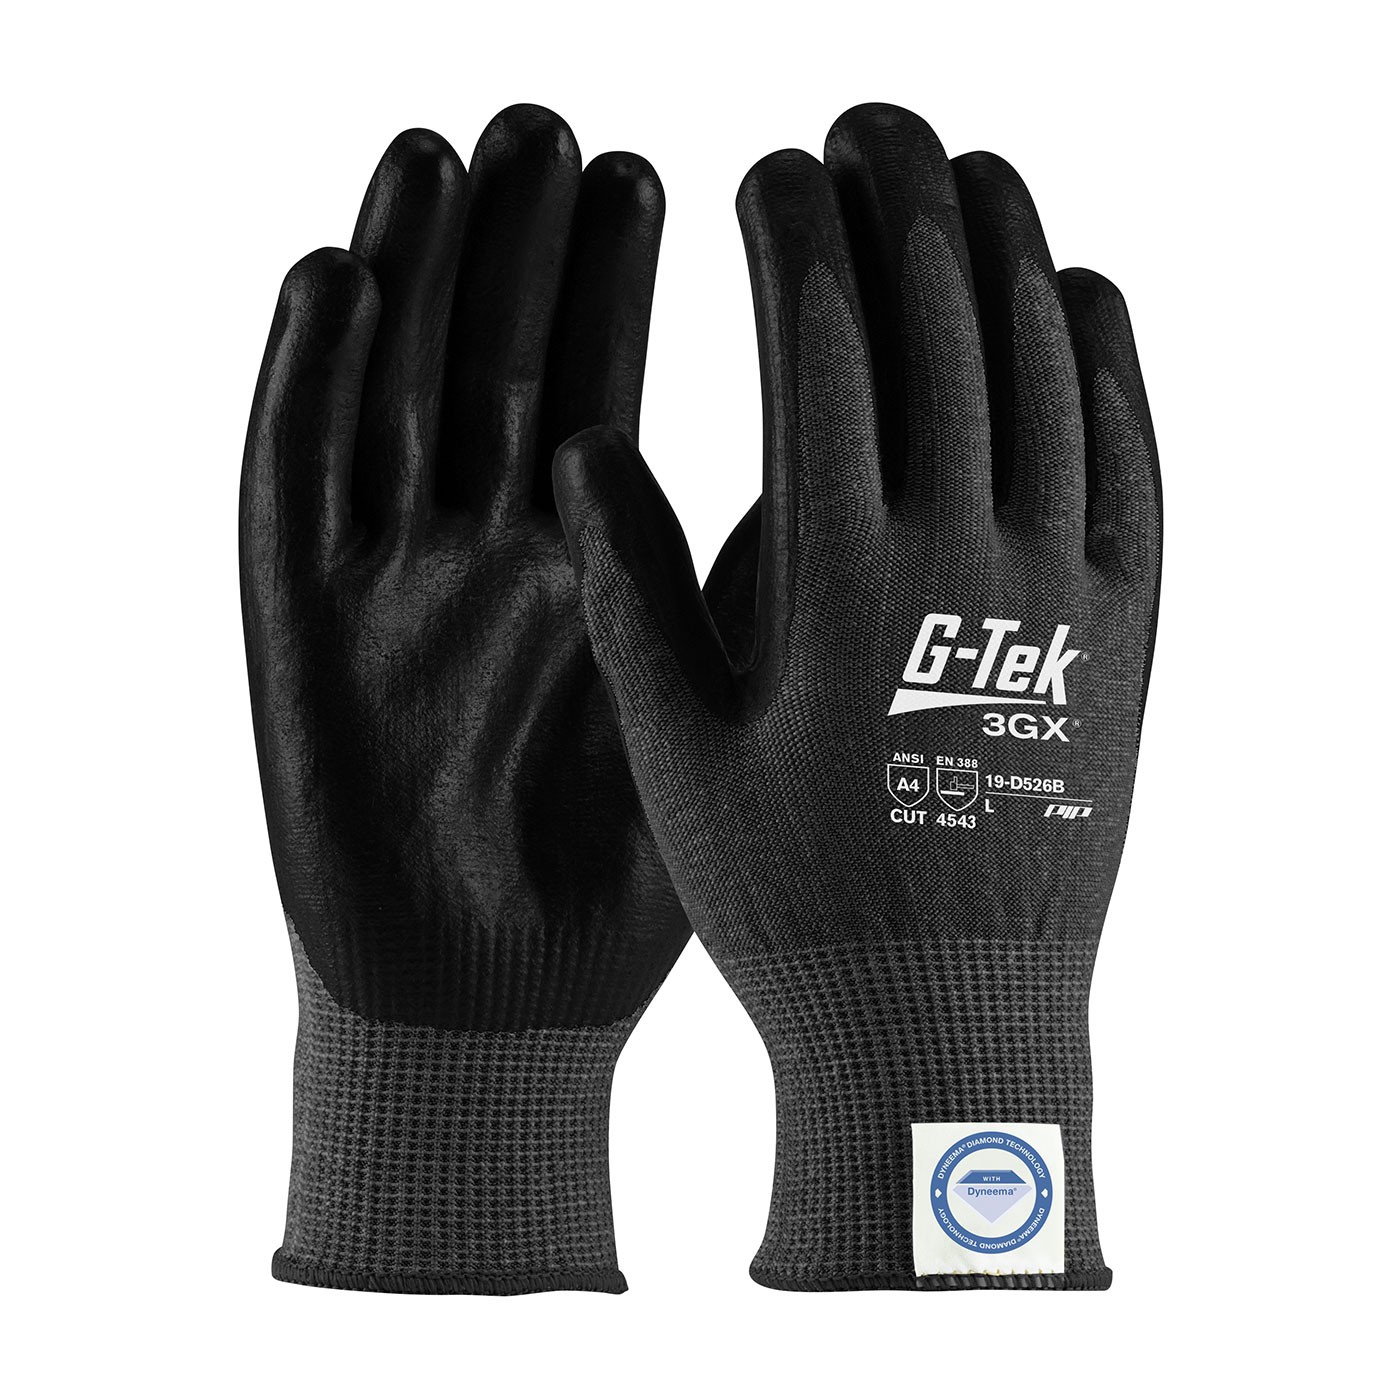 G-Tek® 3GX® Black Seamless Knit Dyneema® Diamond Blended Glove with Nitrile Coated Foam Grip on Palm & Fingers - Touchscreen Compatible  (#19-D534B)